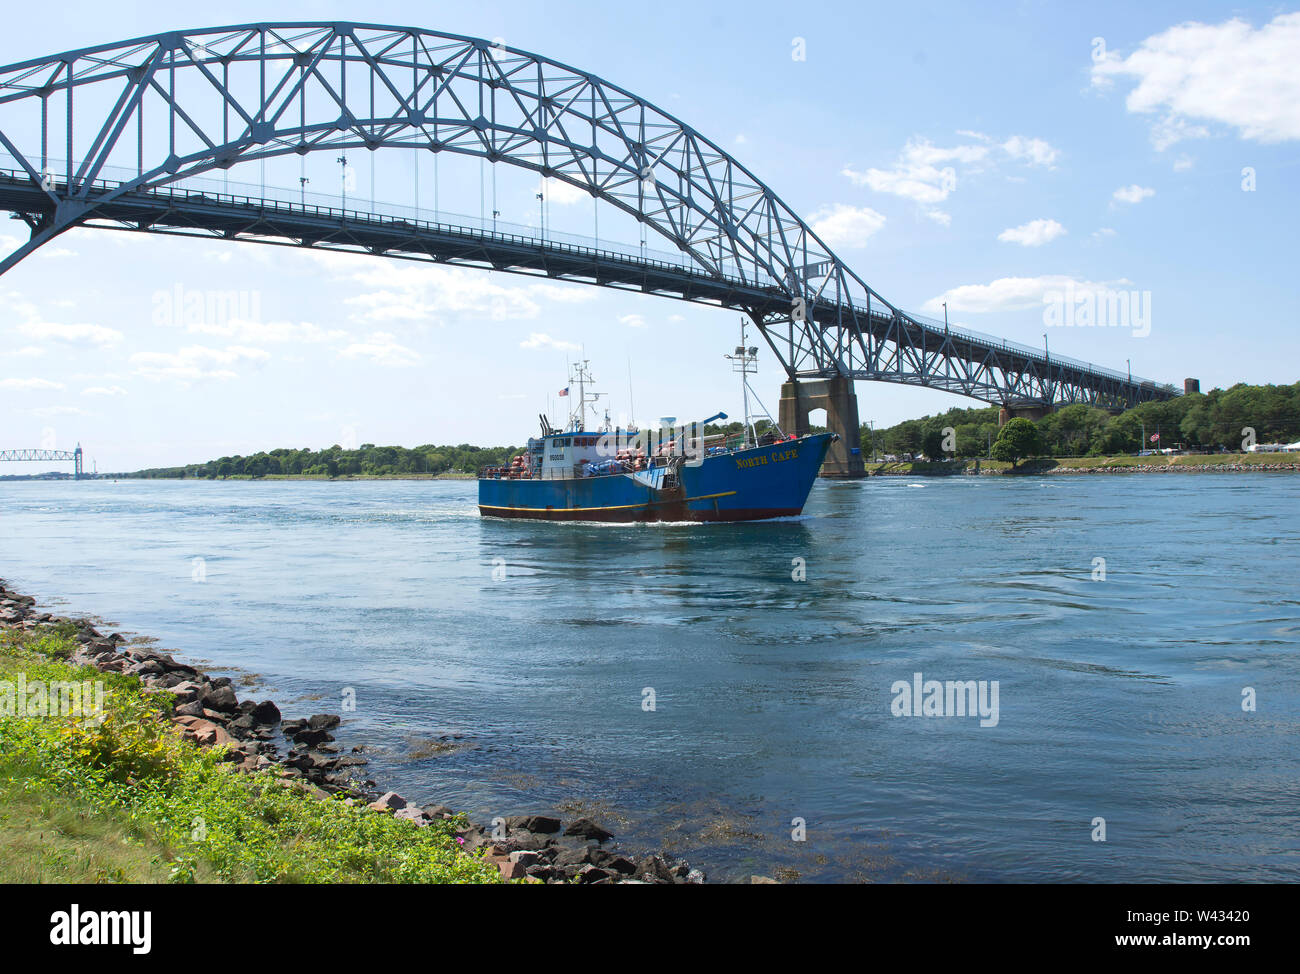 The Bourne bridge which carries traffic over the Cape Cod Canal in Bourne, Massachusetts, USA Stock Photo